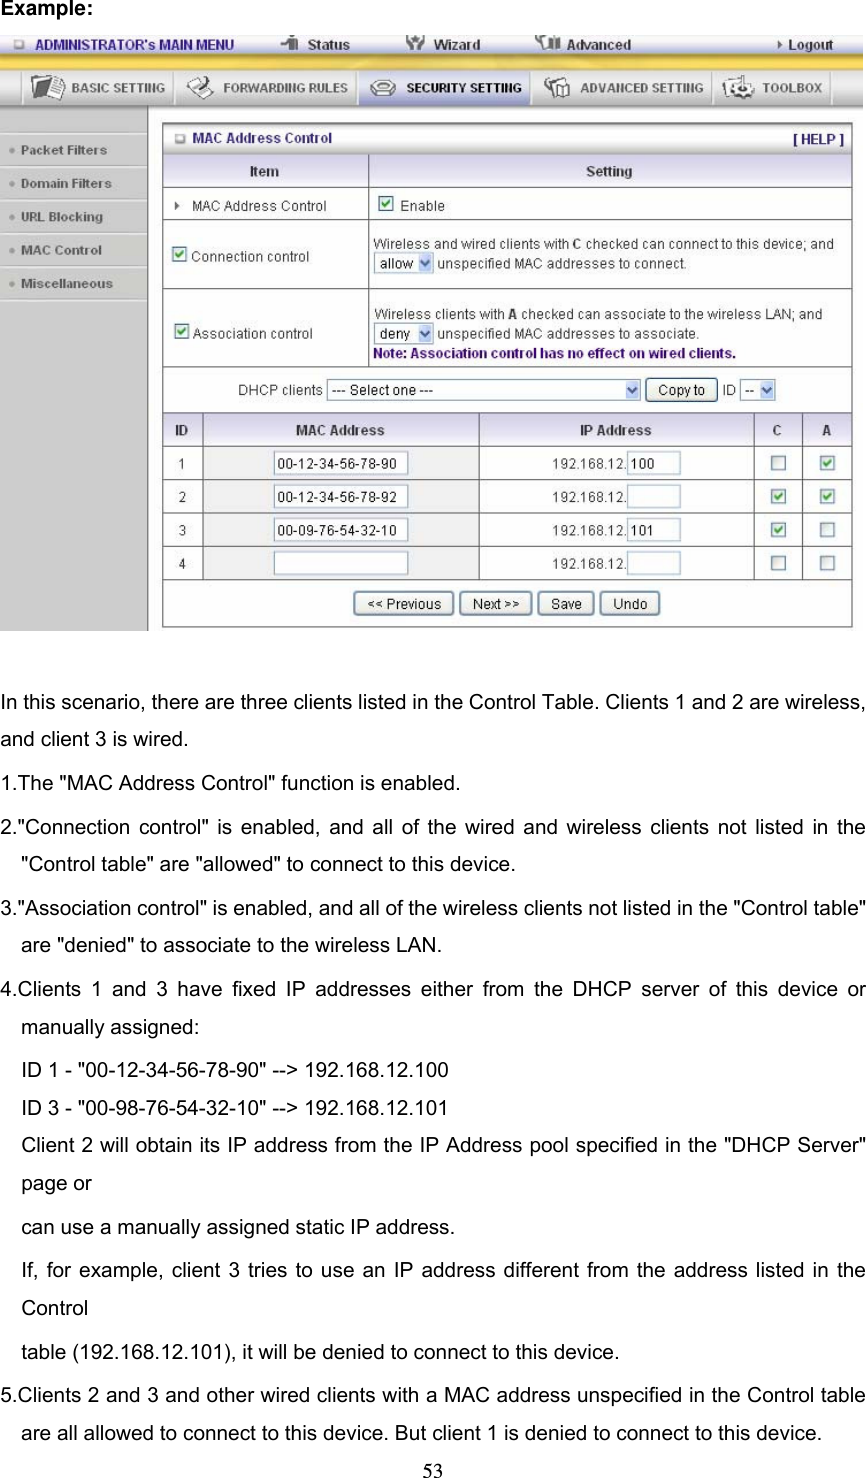  53Example:   In this scenario, there are three clients listed in the Control Table. Clients 1 and 2 are wireless, and client 3 is wired.   1.The &quot;MAC Address Control&quot; function is enabled.   2.&quot;Connection control&quot; is enabled, and all of the wired and wireless clients not listed in the &quot;Control table&quot; are &quot;allowed&quot; to connect to this device.   3.&quot;Association control&quot; is enabled, and all of the wireless clients not listed in the &quot;Control table&quot; are &quot;denied&quot; to associate to the wireless LAN.   4.Clients 1 and 3 have fixed IP addresses either from the DHCP server of this device or manually assigned: ID 1 - &quot;00-12-34-56-78-90&quot; --&gt; 192.168.12.100 ID 3 - &quot;00-98-76-54-32-10&quot; --&gt; 192.168.12.101 Client 2 will obtain its IP address from the IP Address pool specified in the &quot;DHCP Server&quot; page or   can use a manually assigned static IP address. If, for example, client 3 tries to use an IP address different from the address listed in the Control  table (192.168.12.101), it will be denied to connect to this device.   5.Clients 2 and 3 and other wired clients with a MAC address unspecified in the Control table are all allowed to connect to this device. But client 1 is denied to connect to this device.   